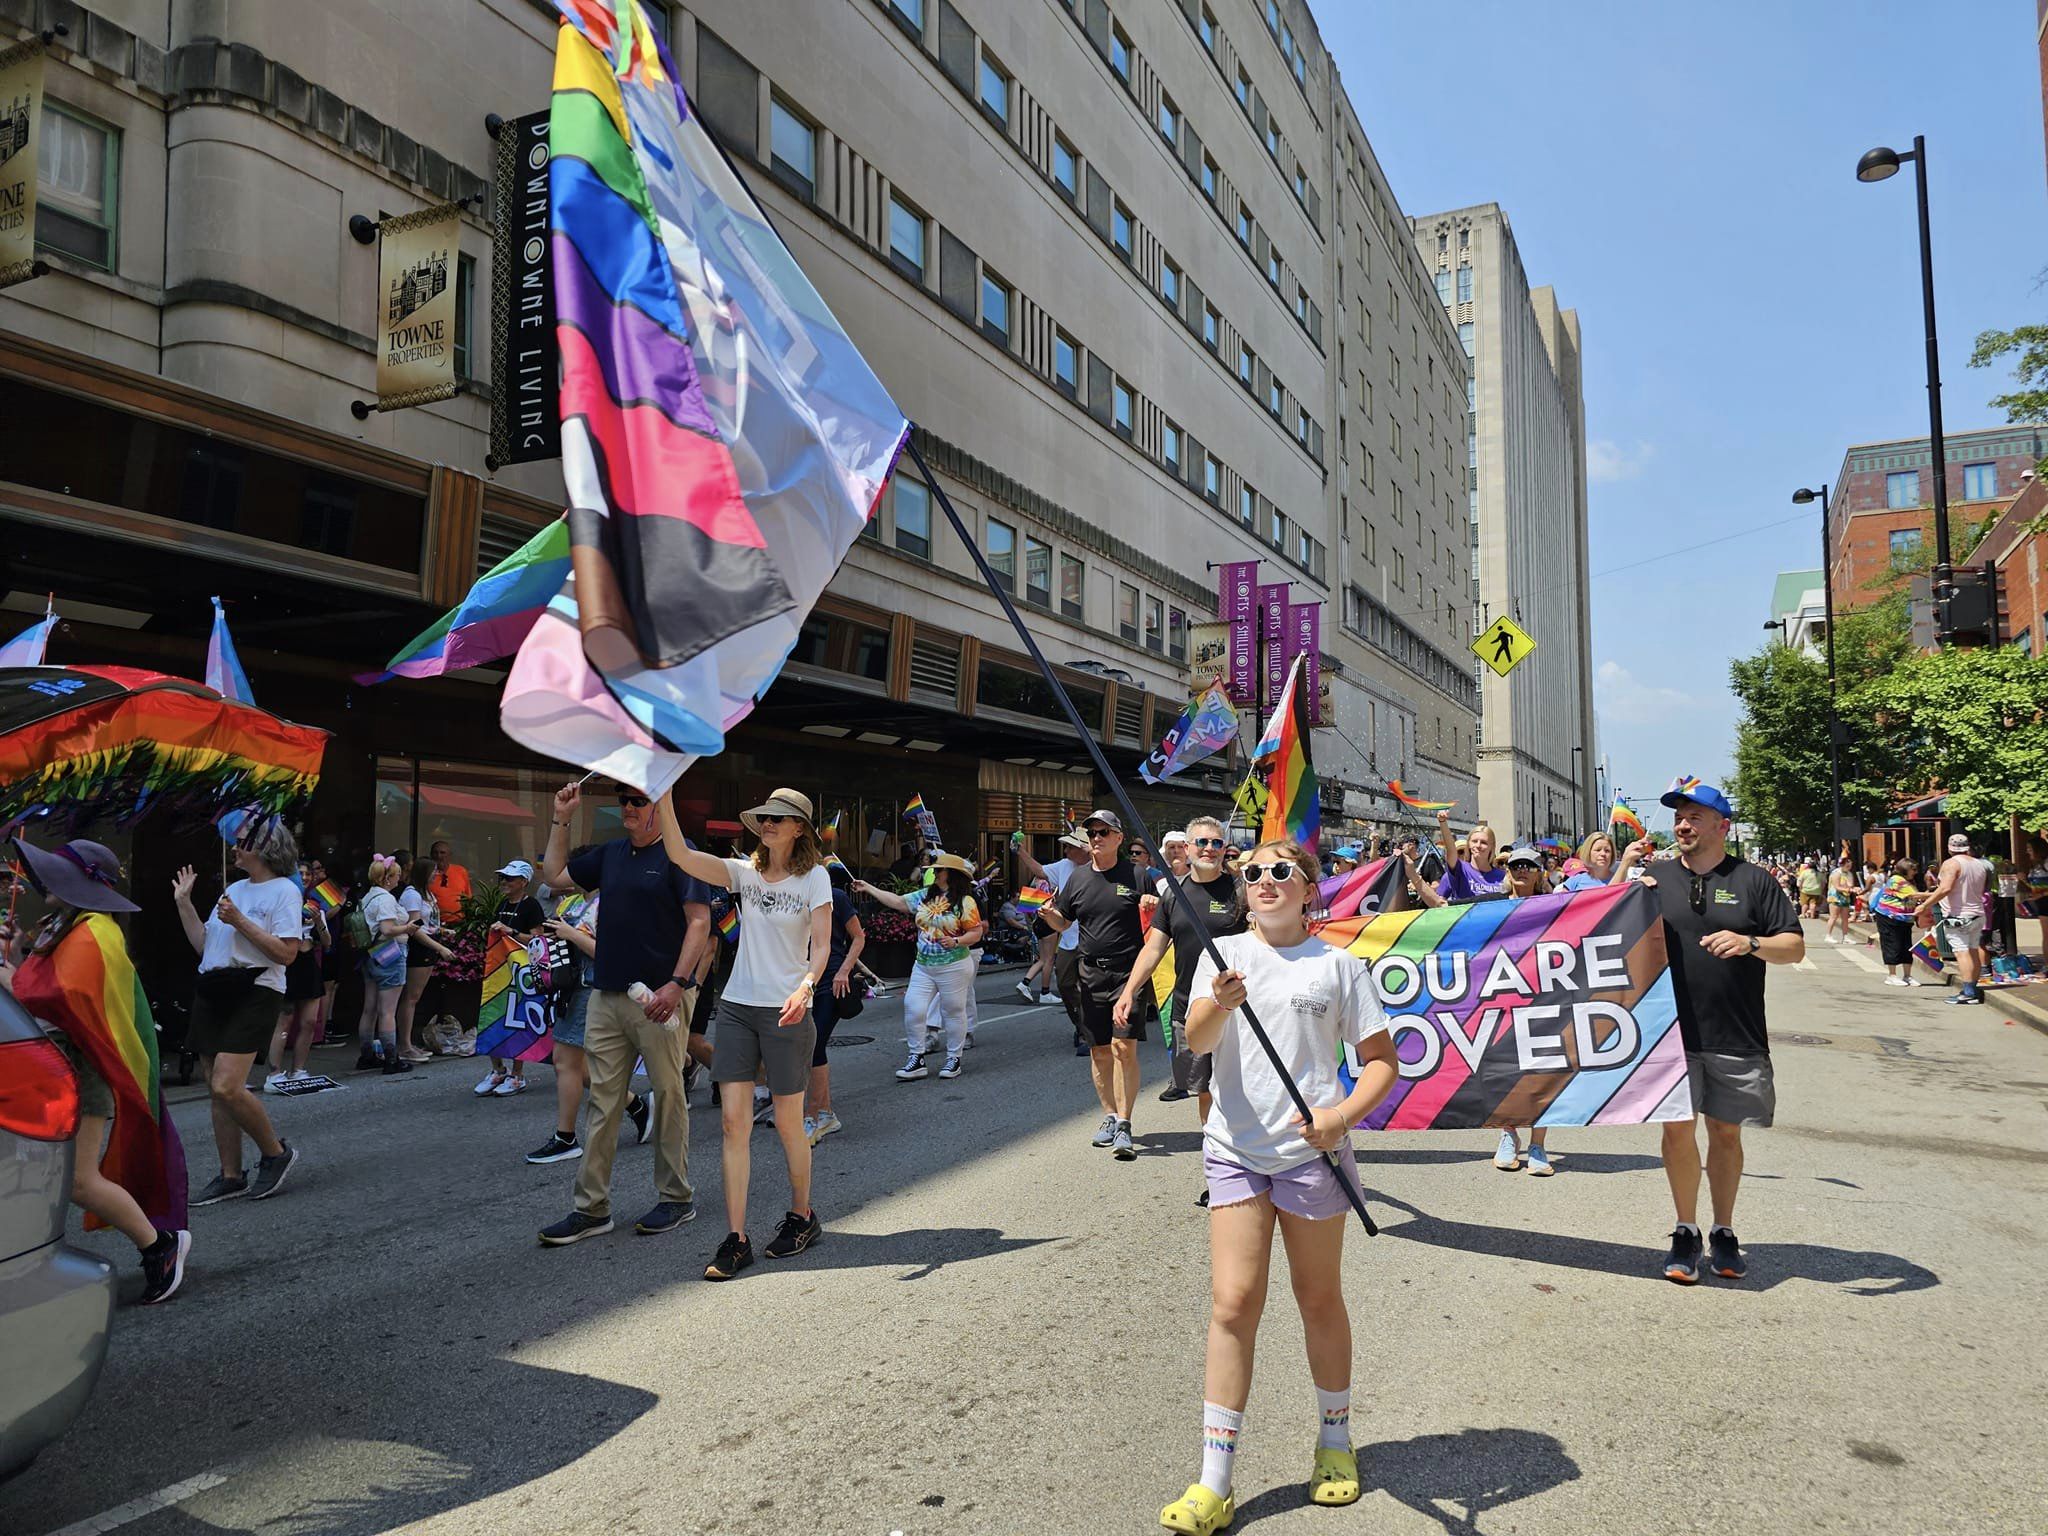 LCR members marching in the Pride Parade 2023, one young girl is waving a Pride flag